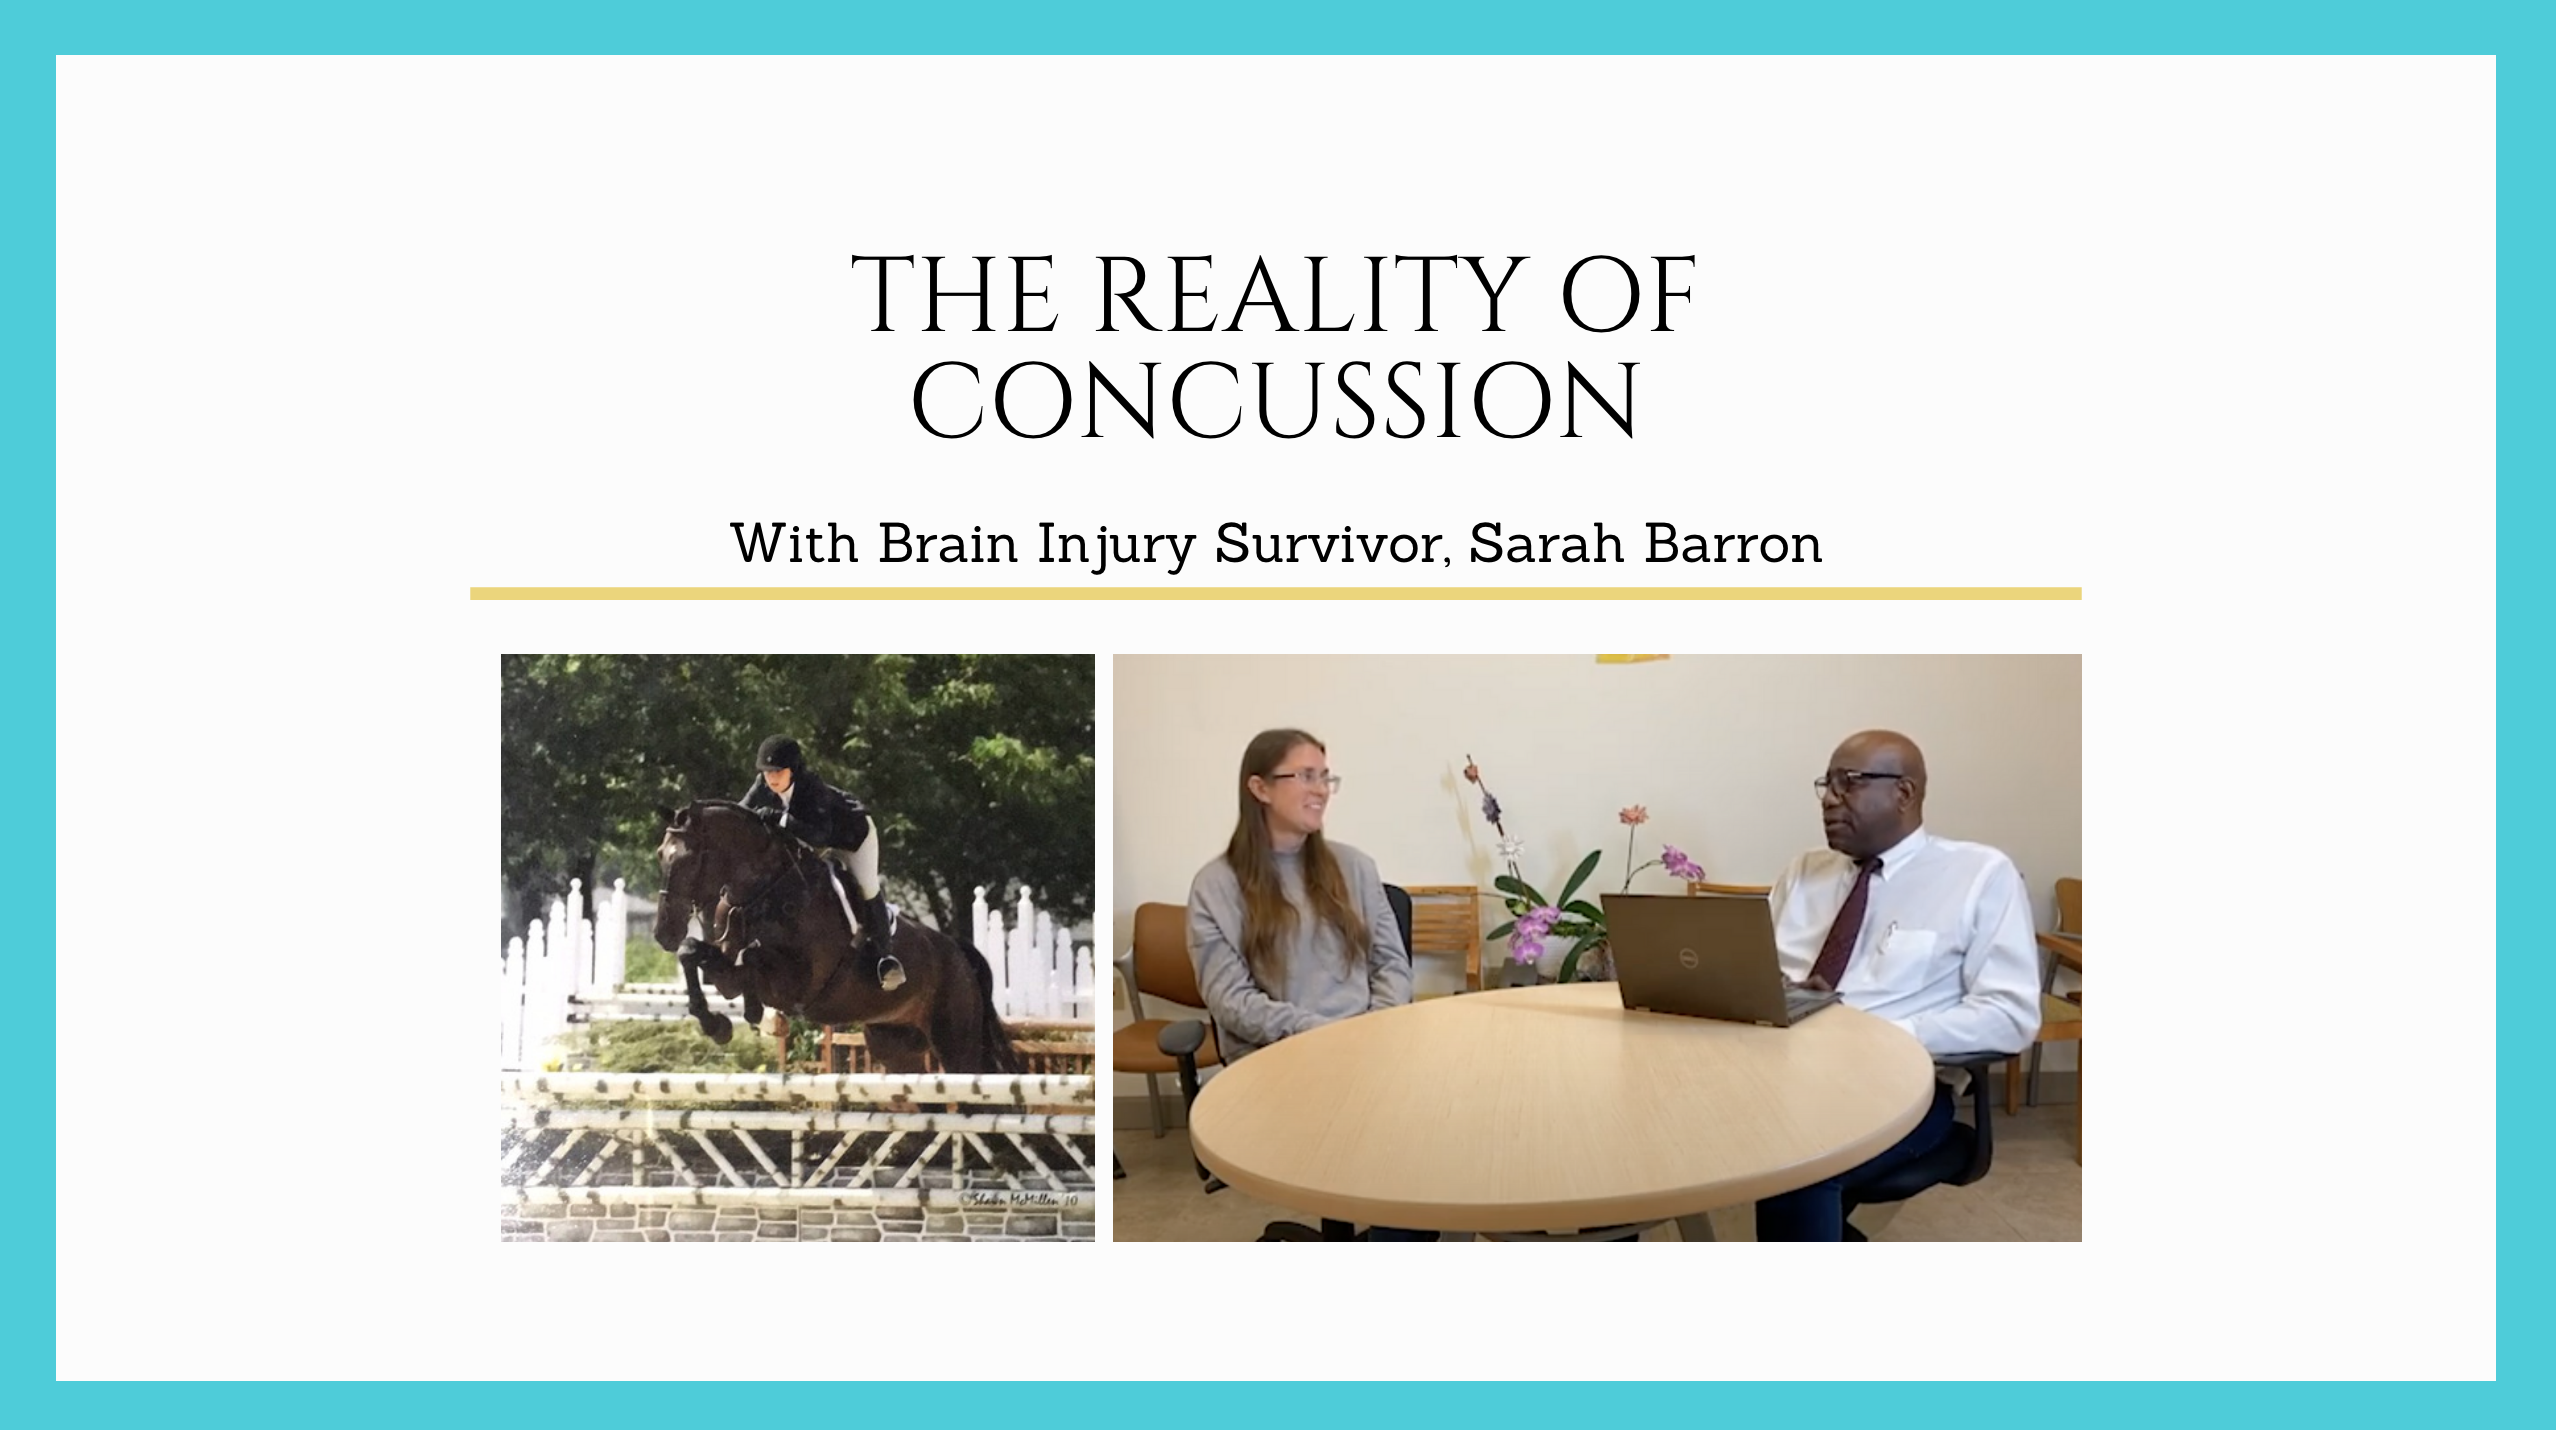 The Reality of Concussion